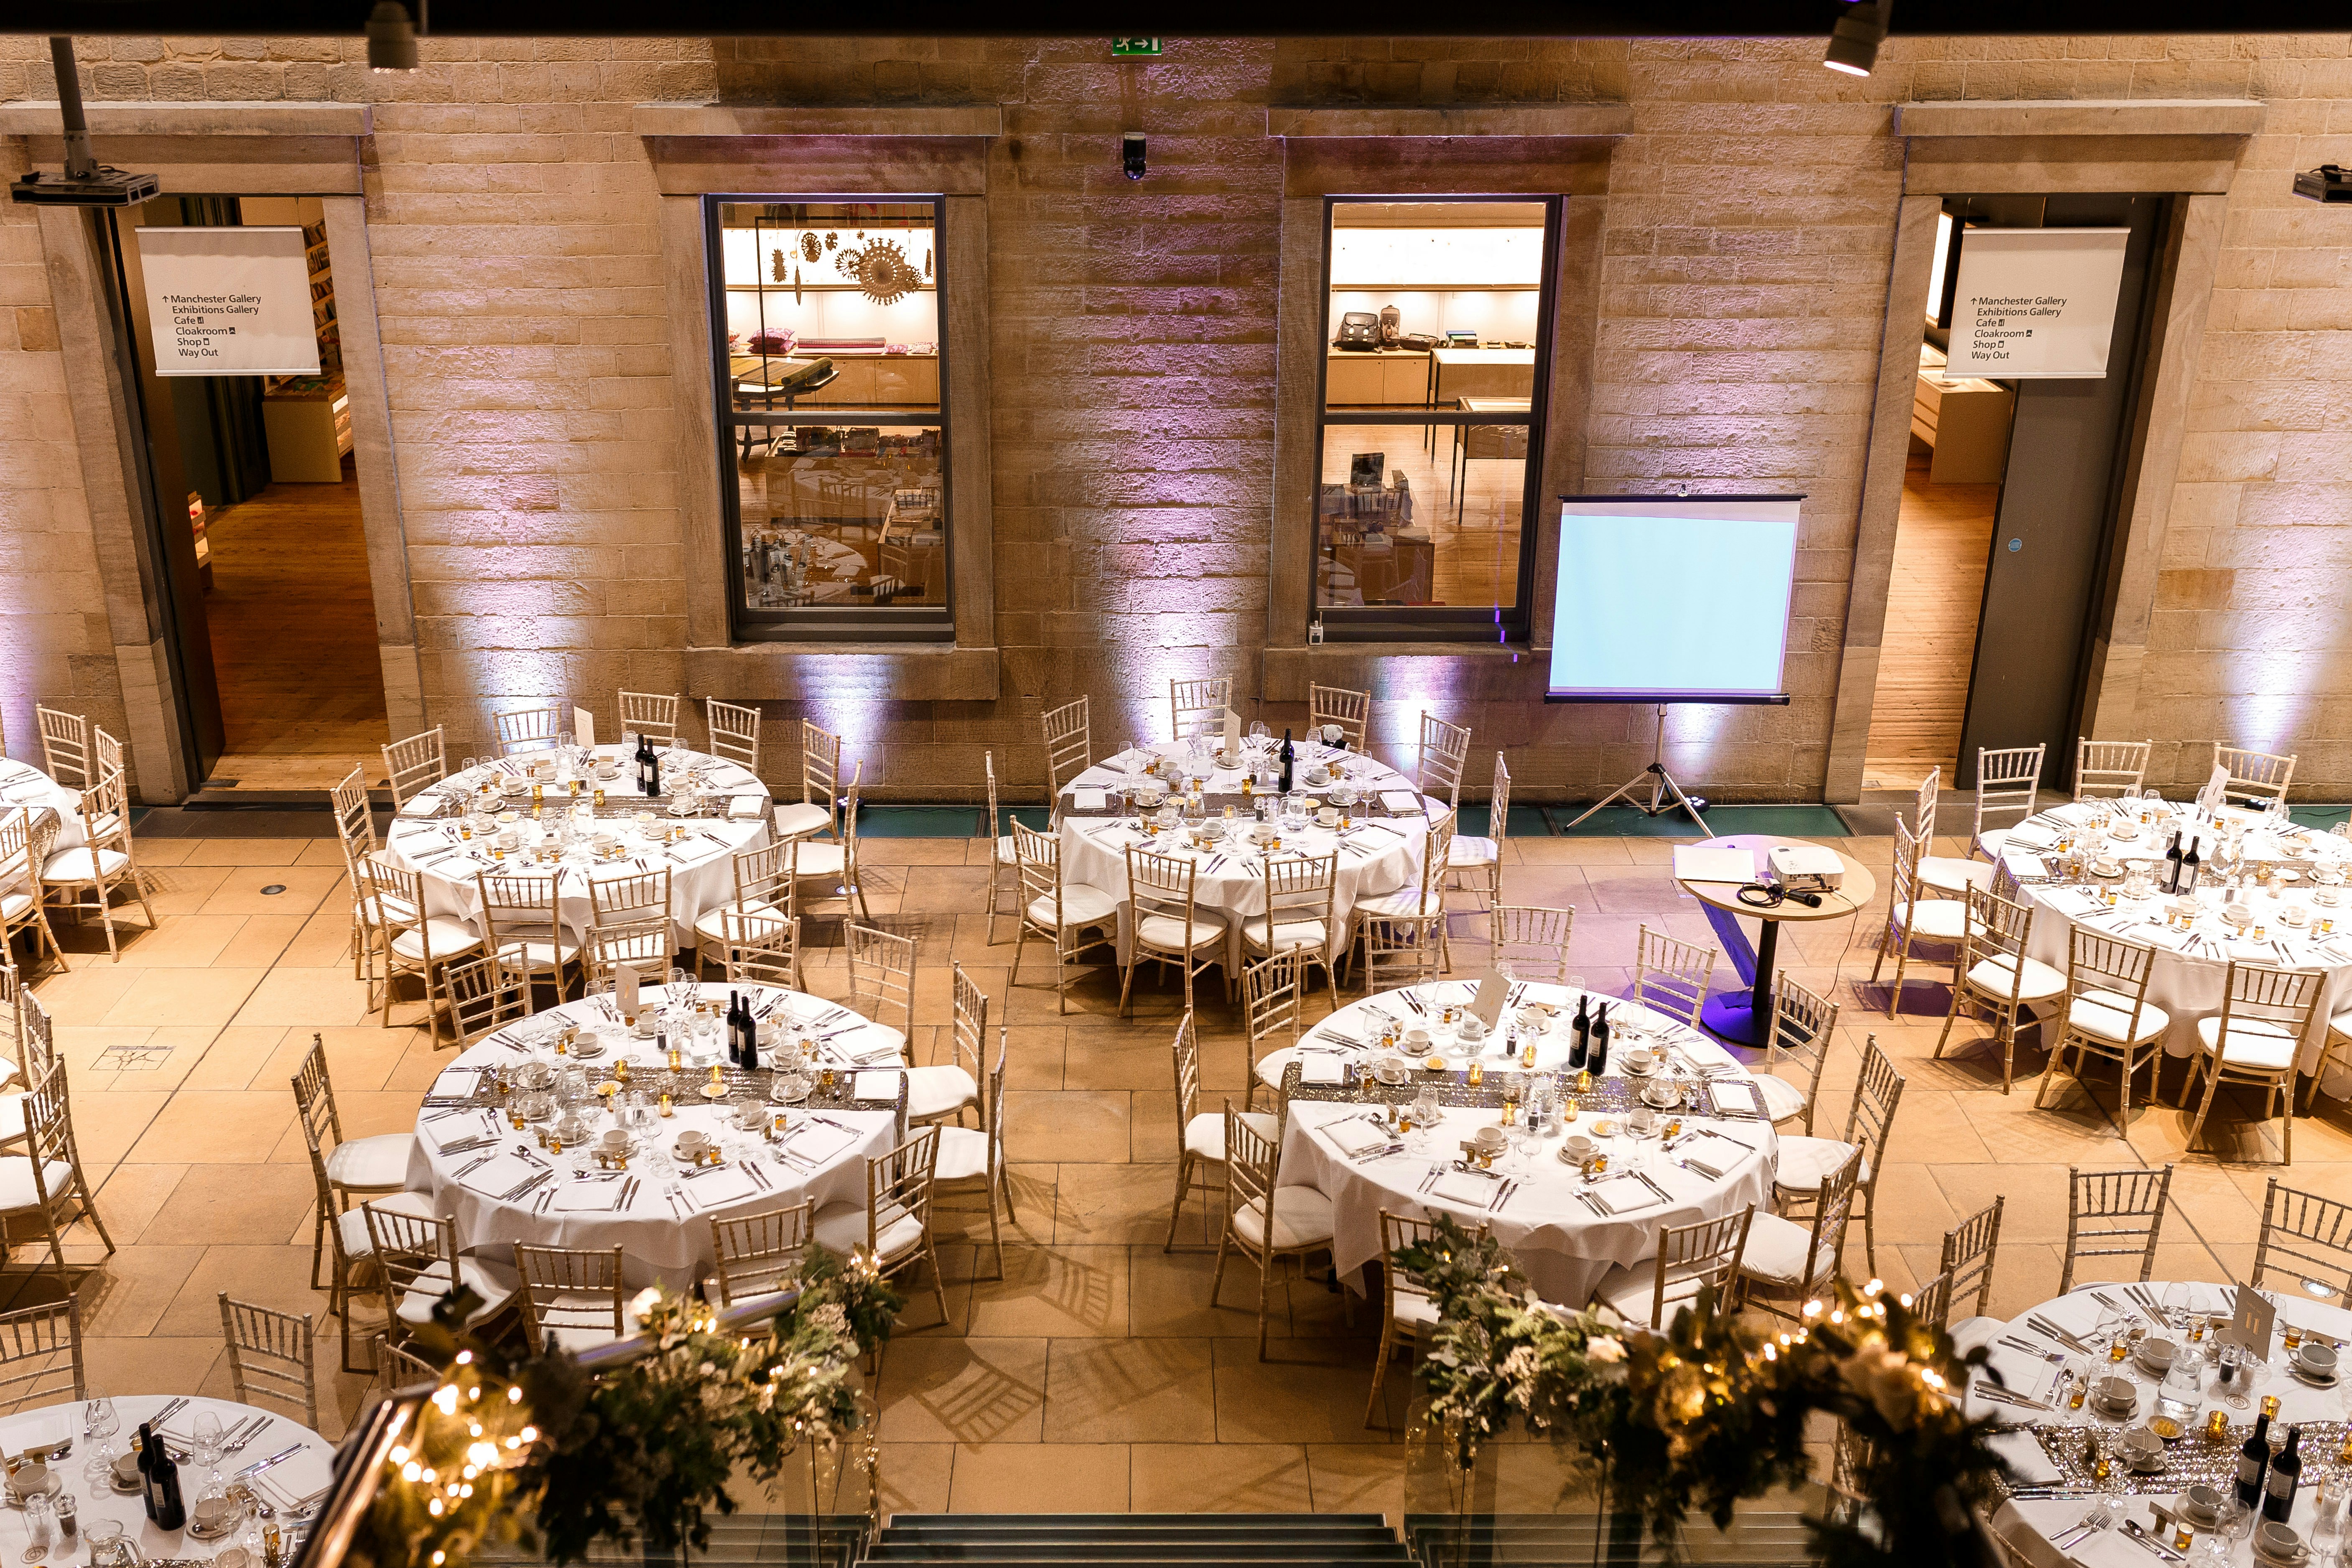 Memorable Wedding Venues in Manchester - Manchester Art Gallery